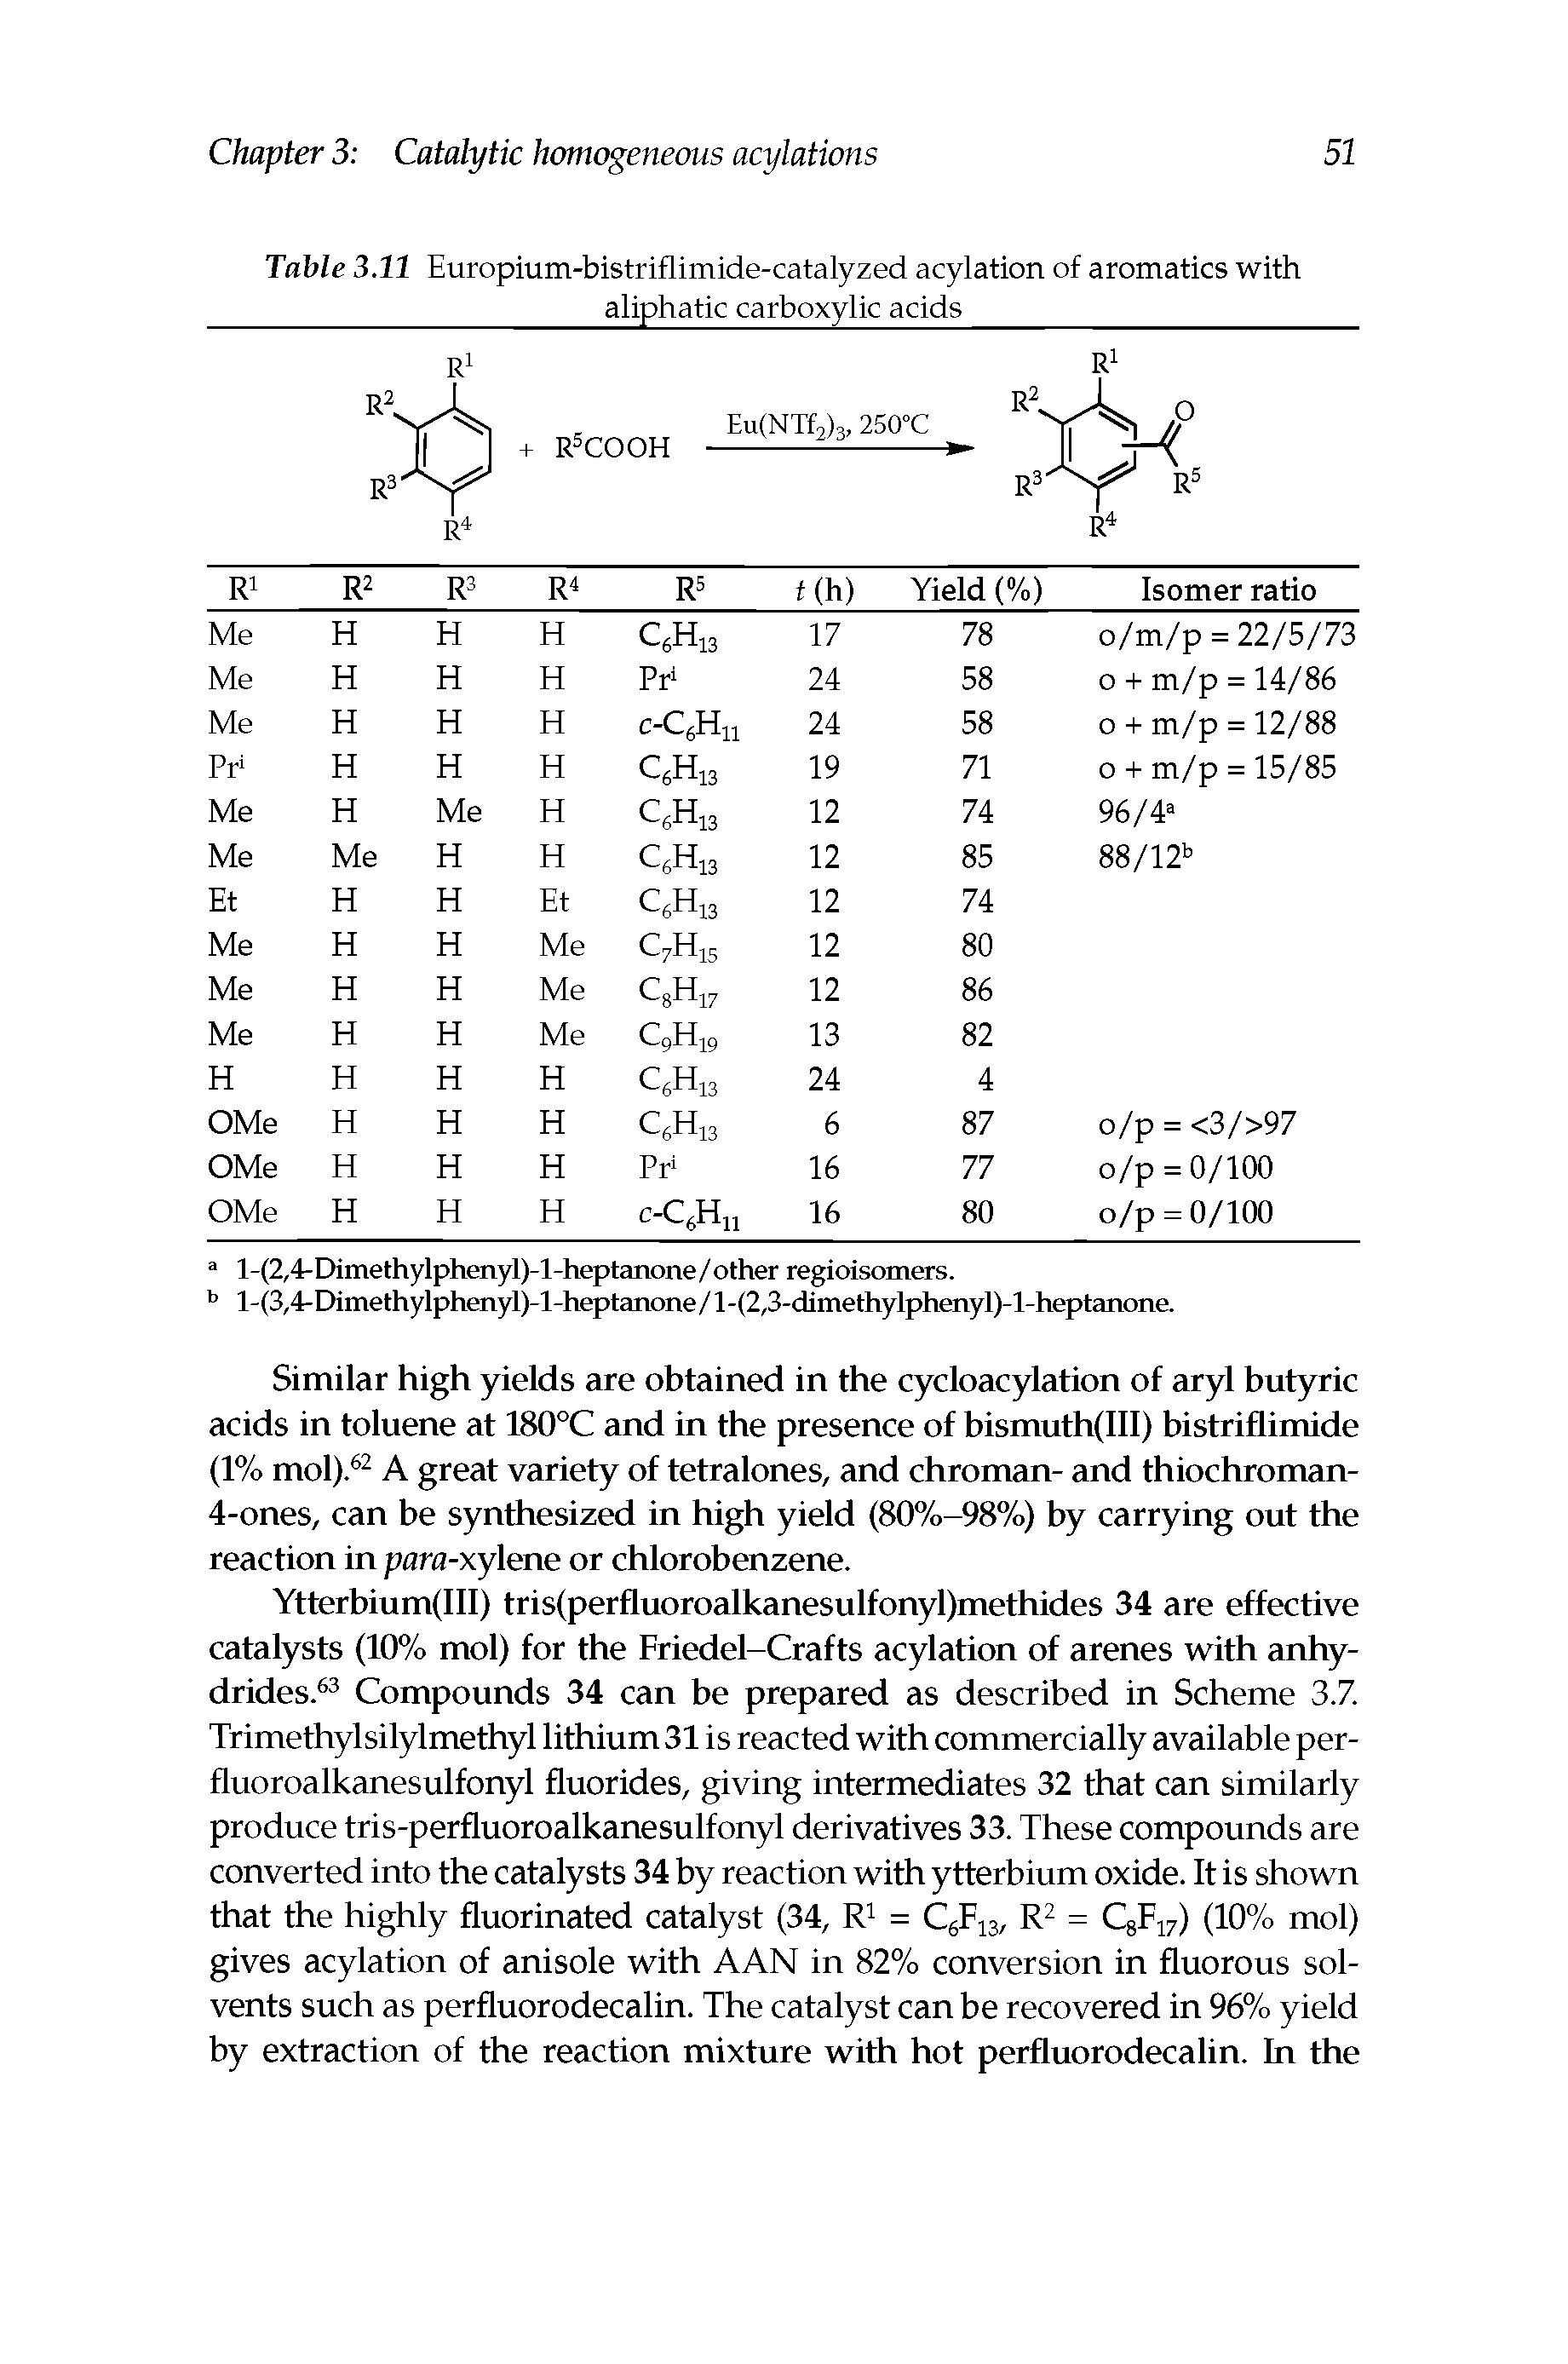 Table 3.11 Europium-bistriflimide-catalyzed acylation of aromatics with aliphatic carboxylic acids ...